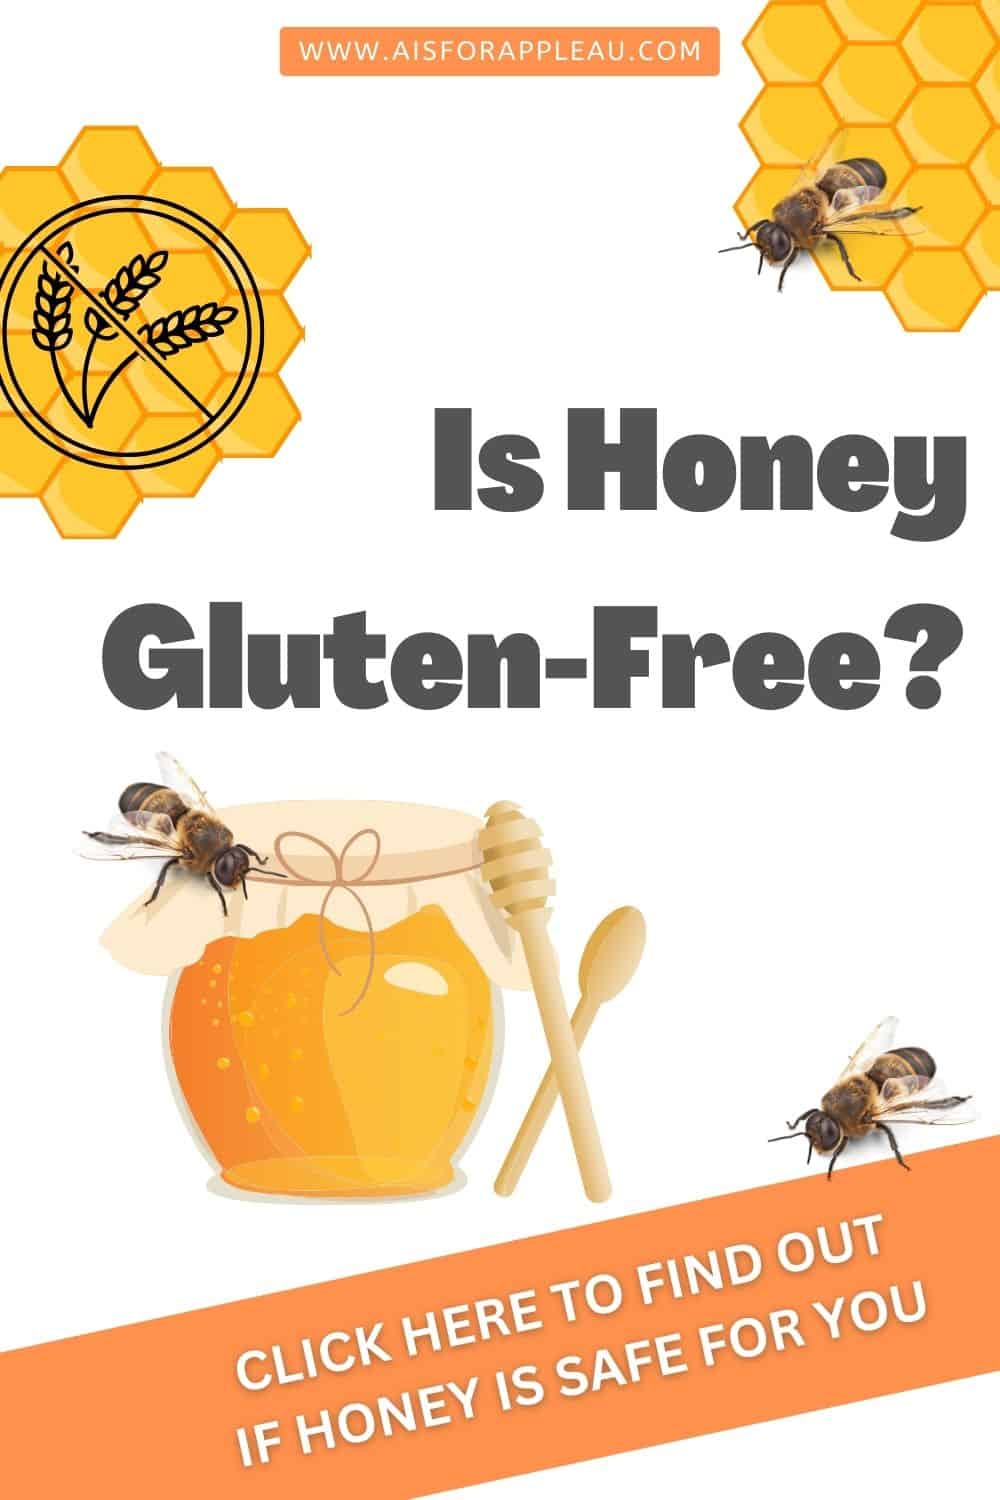 image with a question if honey is gluten-free